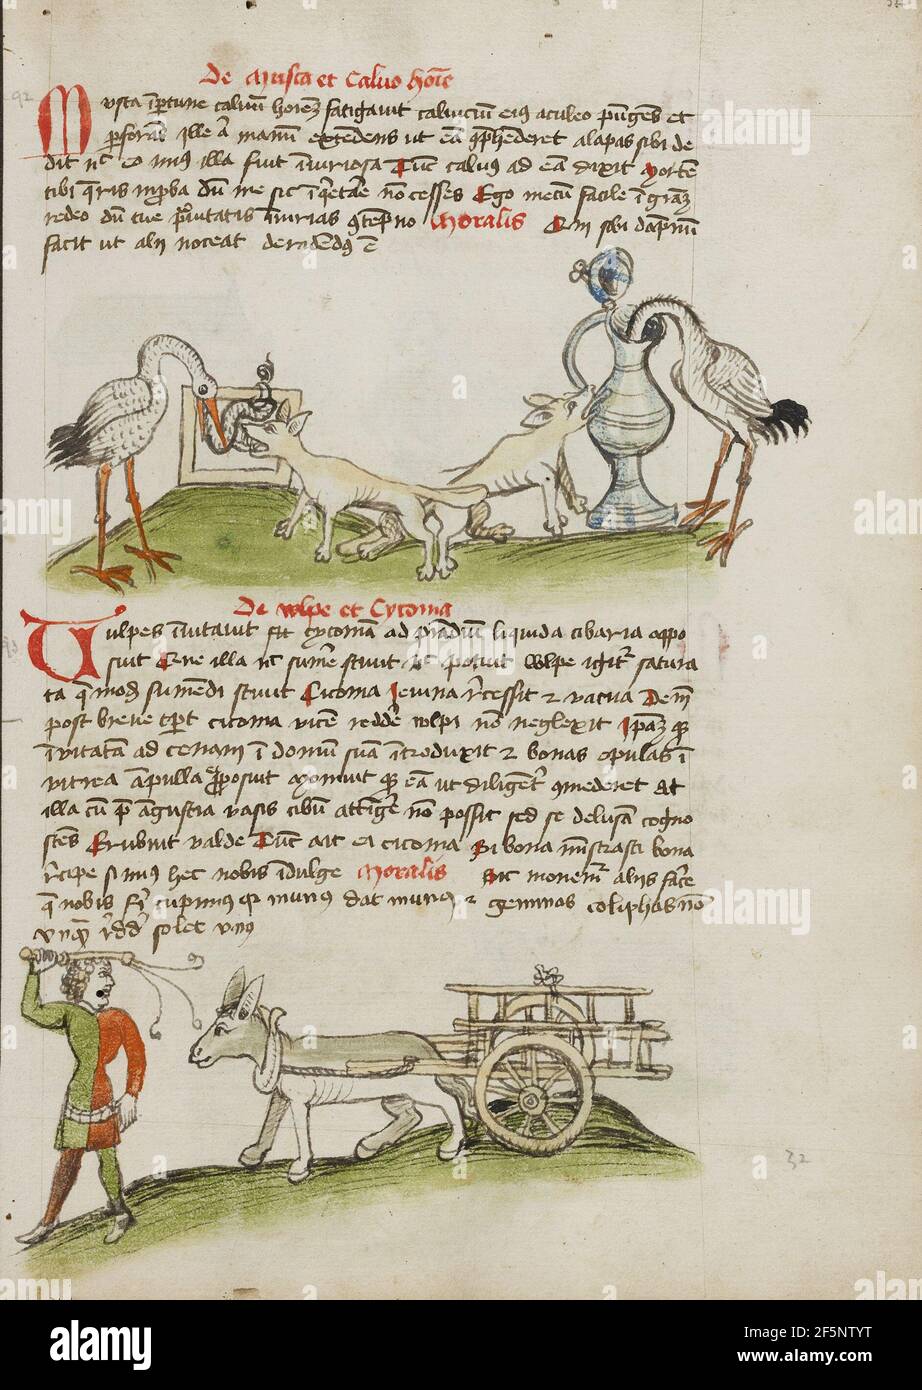 A Stork with its Head in a Vessel and a Fox Nearby; A Stork Spitting Out a Snake which the Fox Eats; A Farmer Driving a Mule-Cart. Unknown Stock Photo